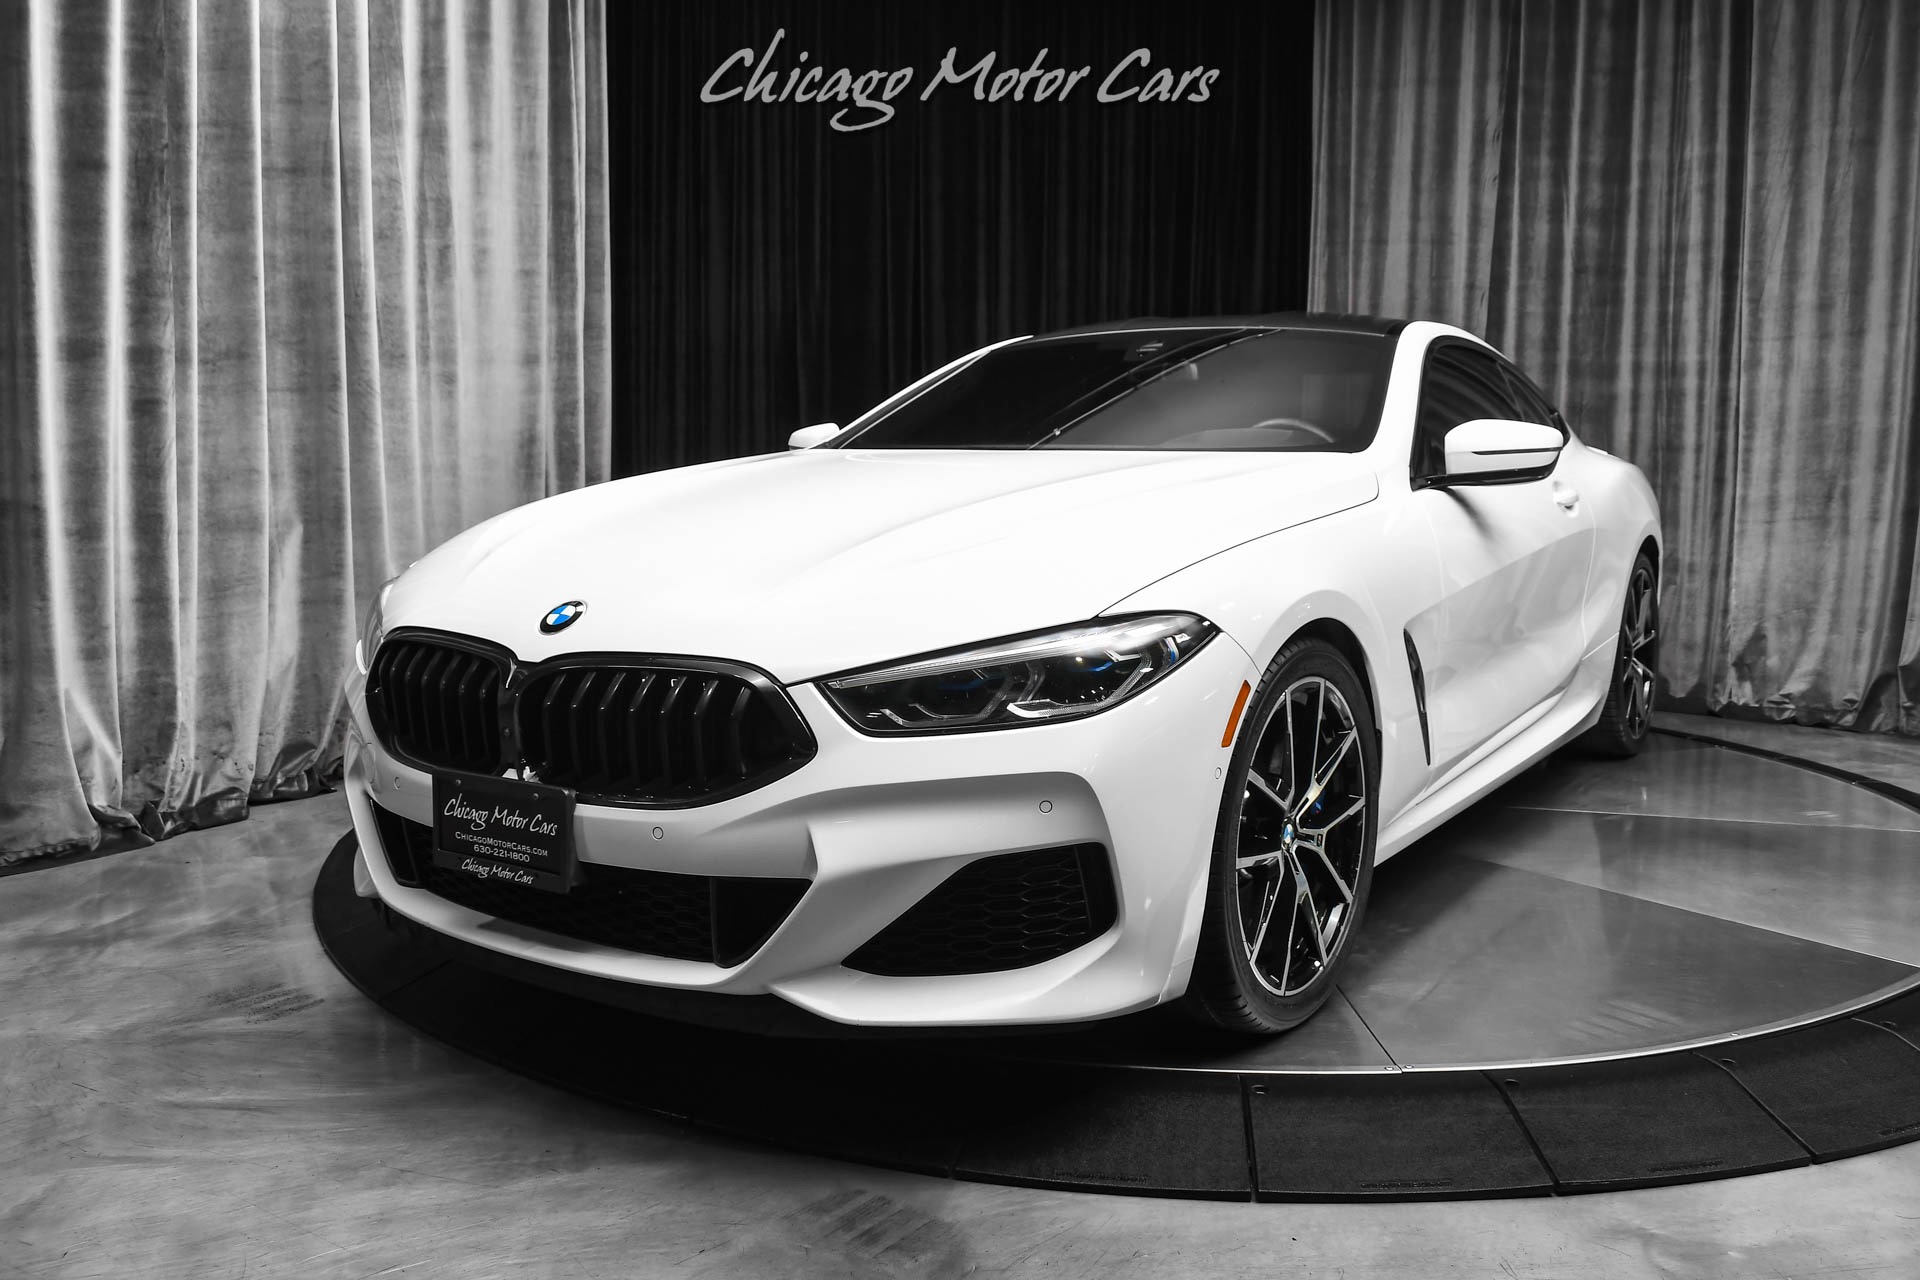 Used-2019-BMW-M850i-xDrive-Coupe-Bowers---Wilkins-Carbon-Fiber-Roof-523HP--553TQ